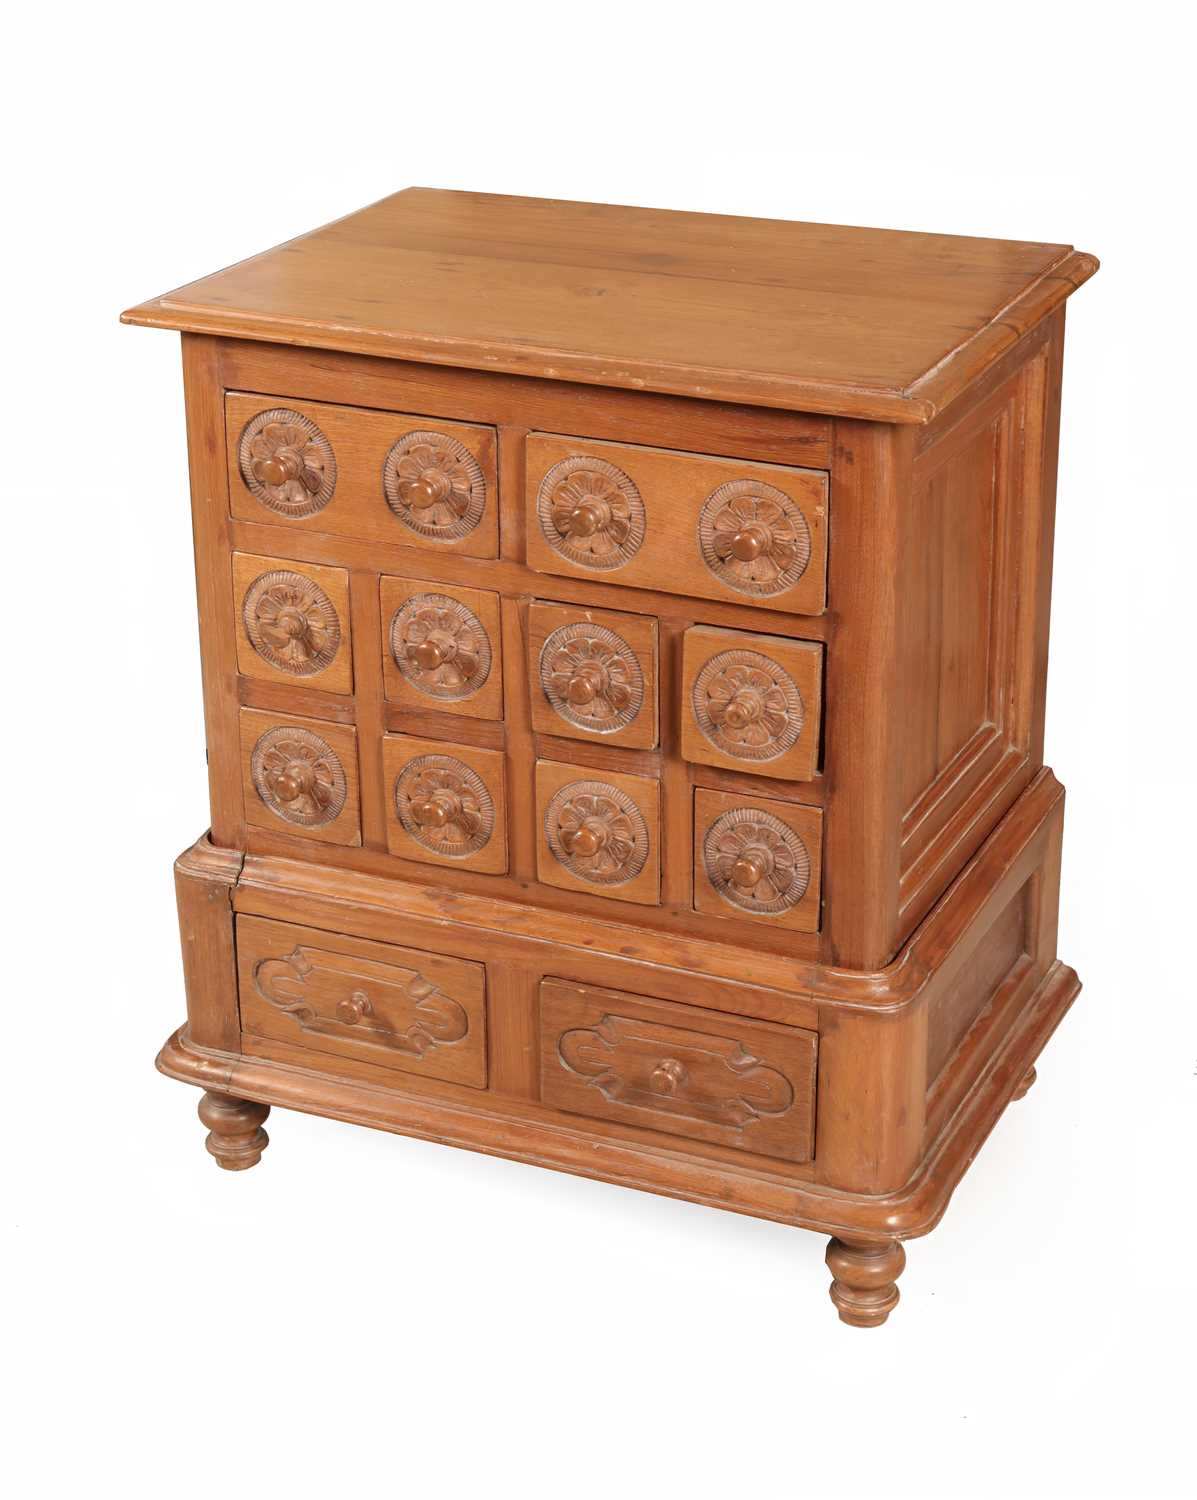 Lot 48 - Carved Anglo-Indian Chest of Drawers